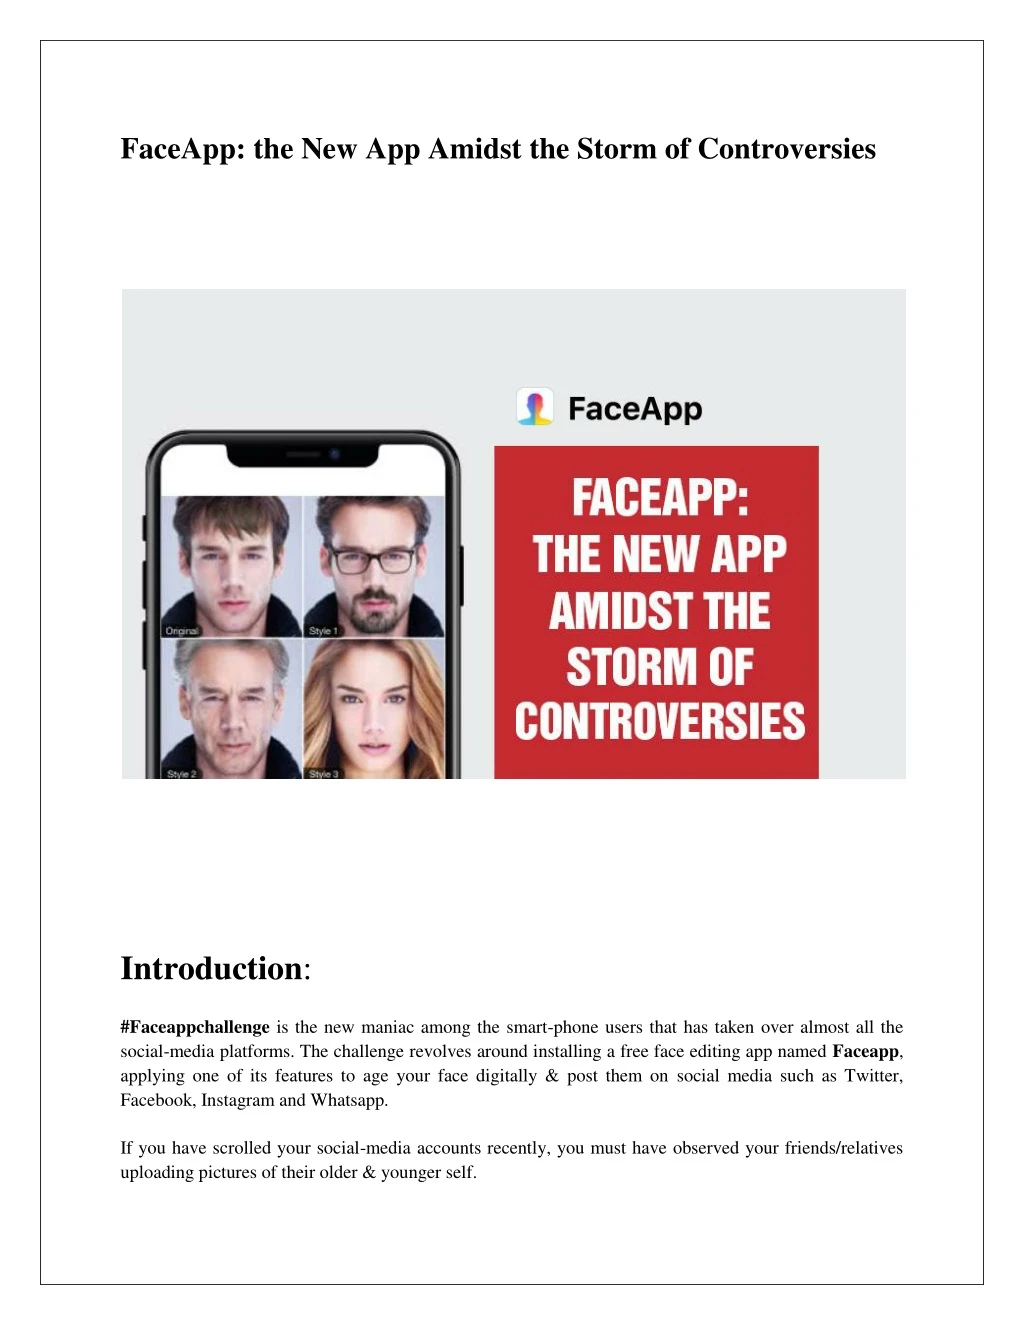 faceapp the new app amidst the storm